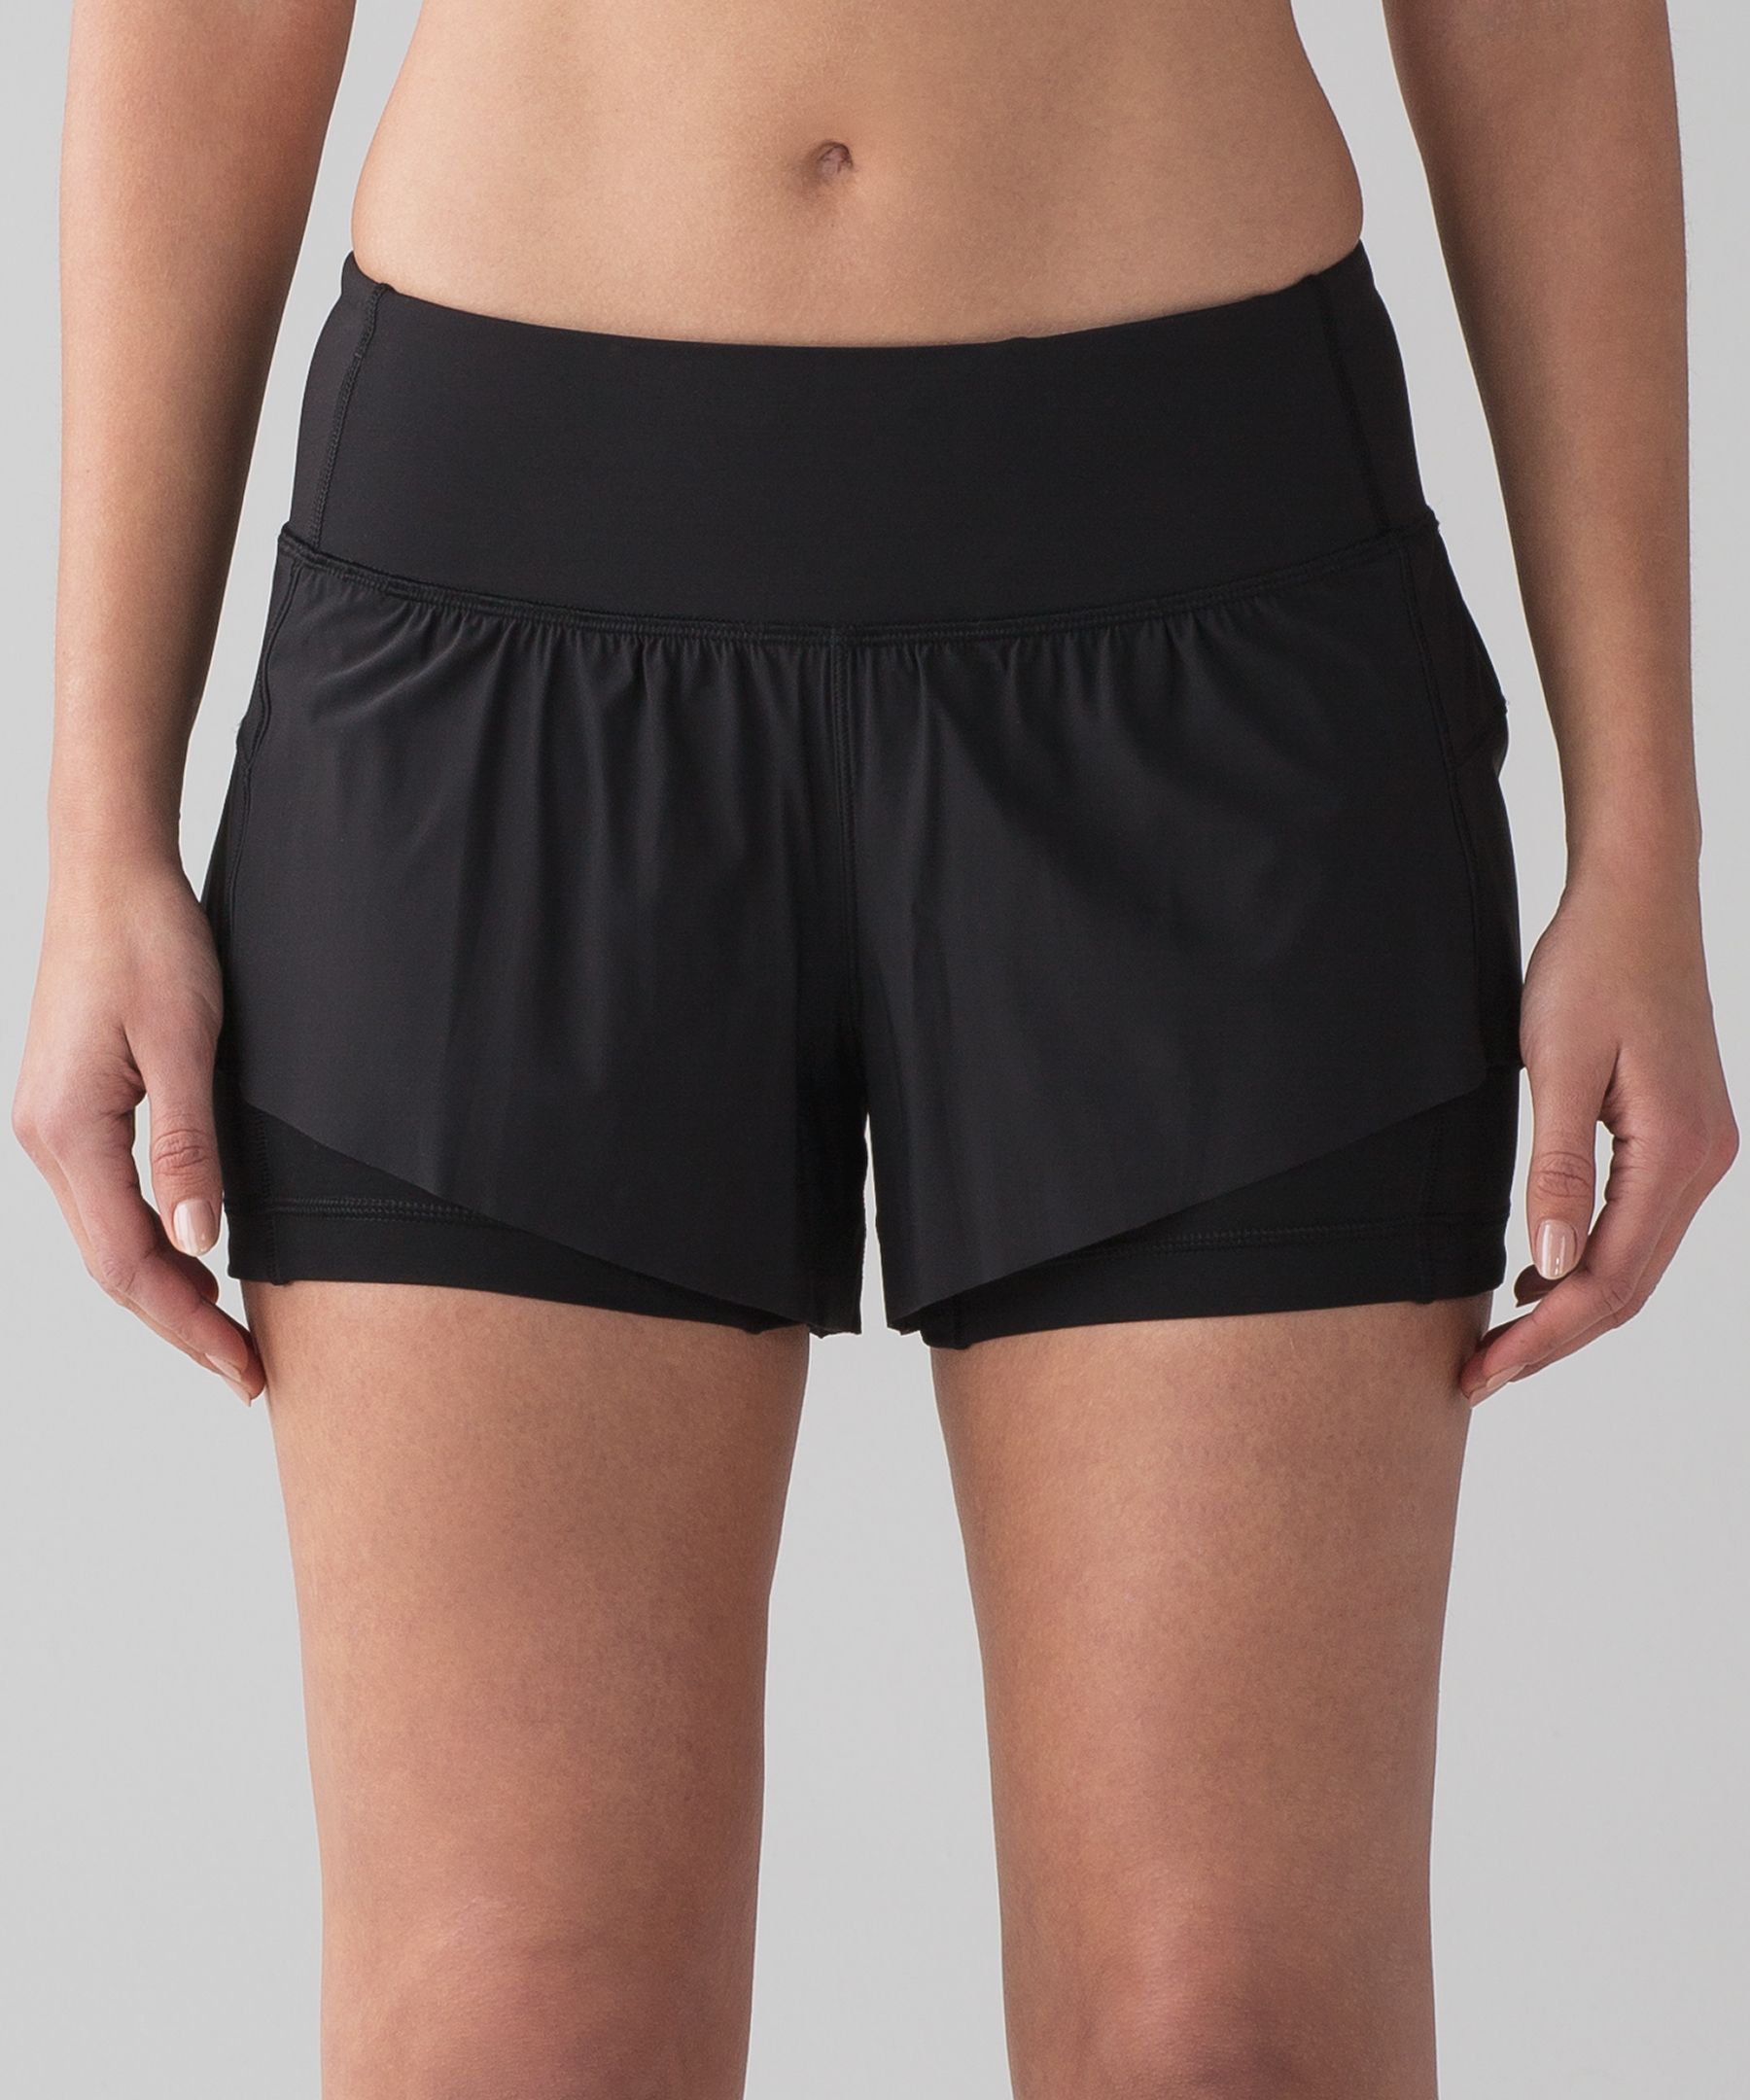 lululemon shorts with built in spandex